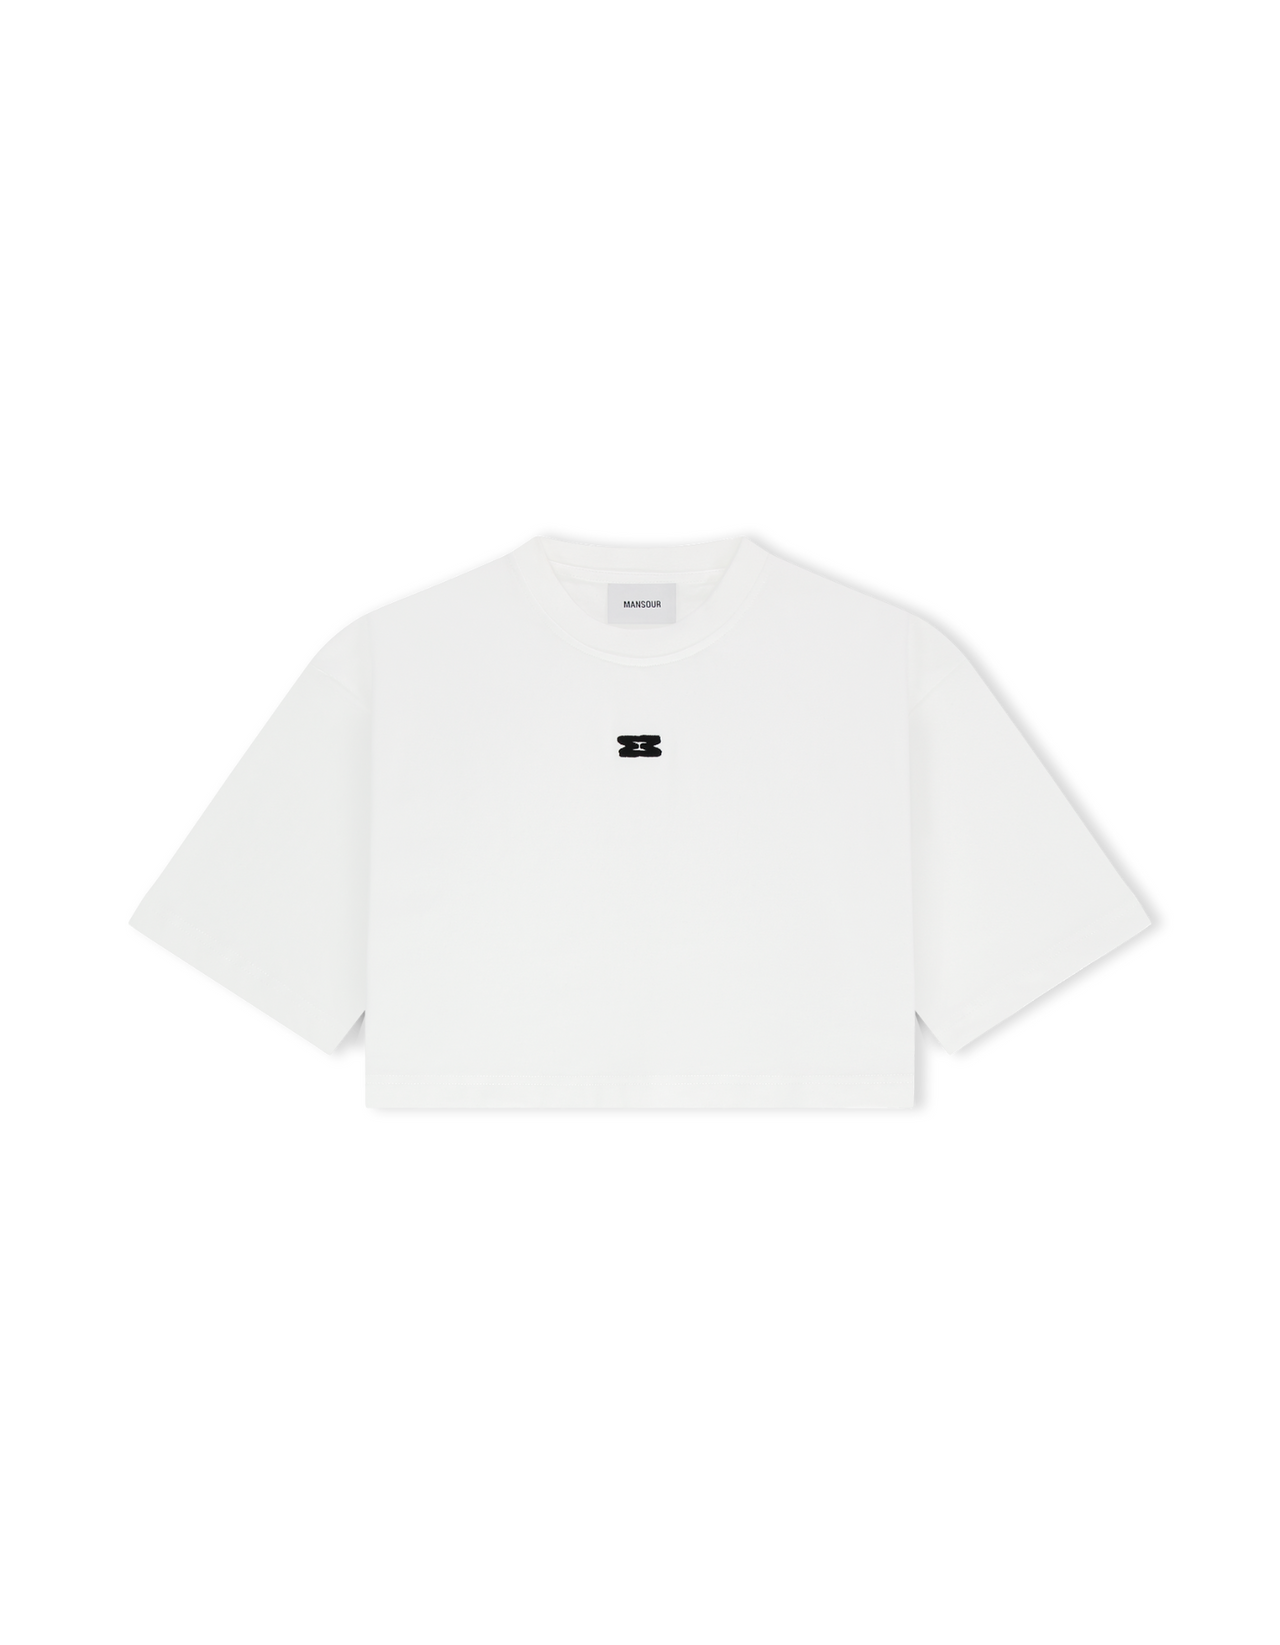 Hourglass t-shirt cropped white